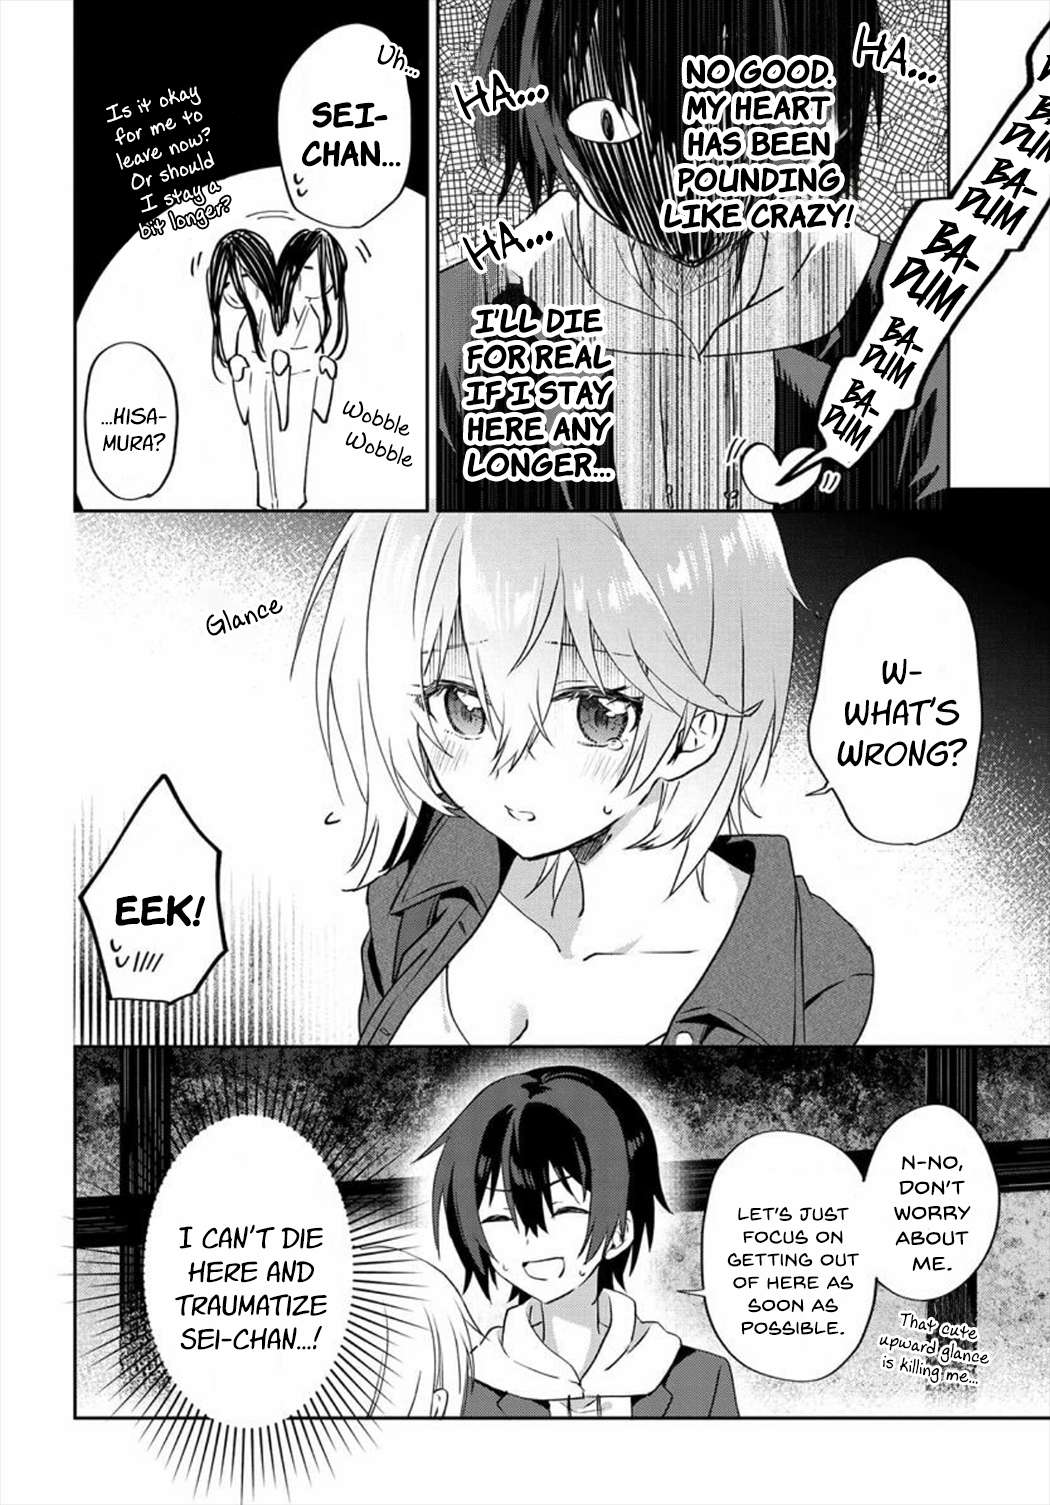 Since I’Ve Entered The World Of Romantic Comedy Manga, I’Ll Do My Best To Make The Losing Heroine Happy - chapter 7.3 - #3